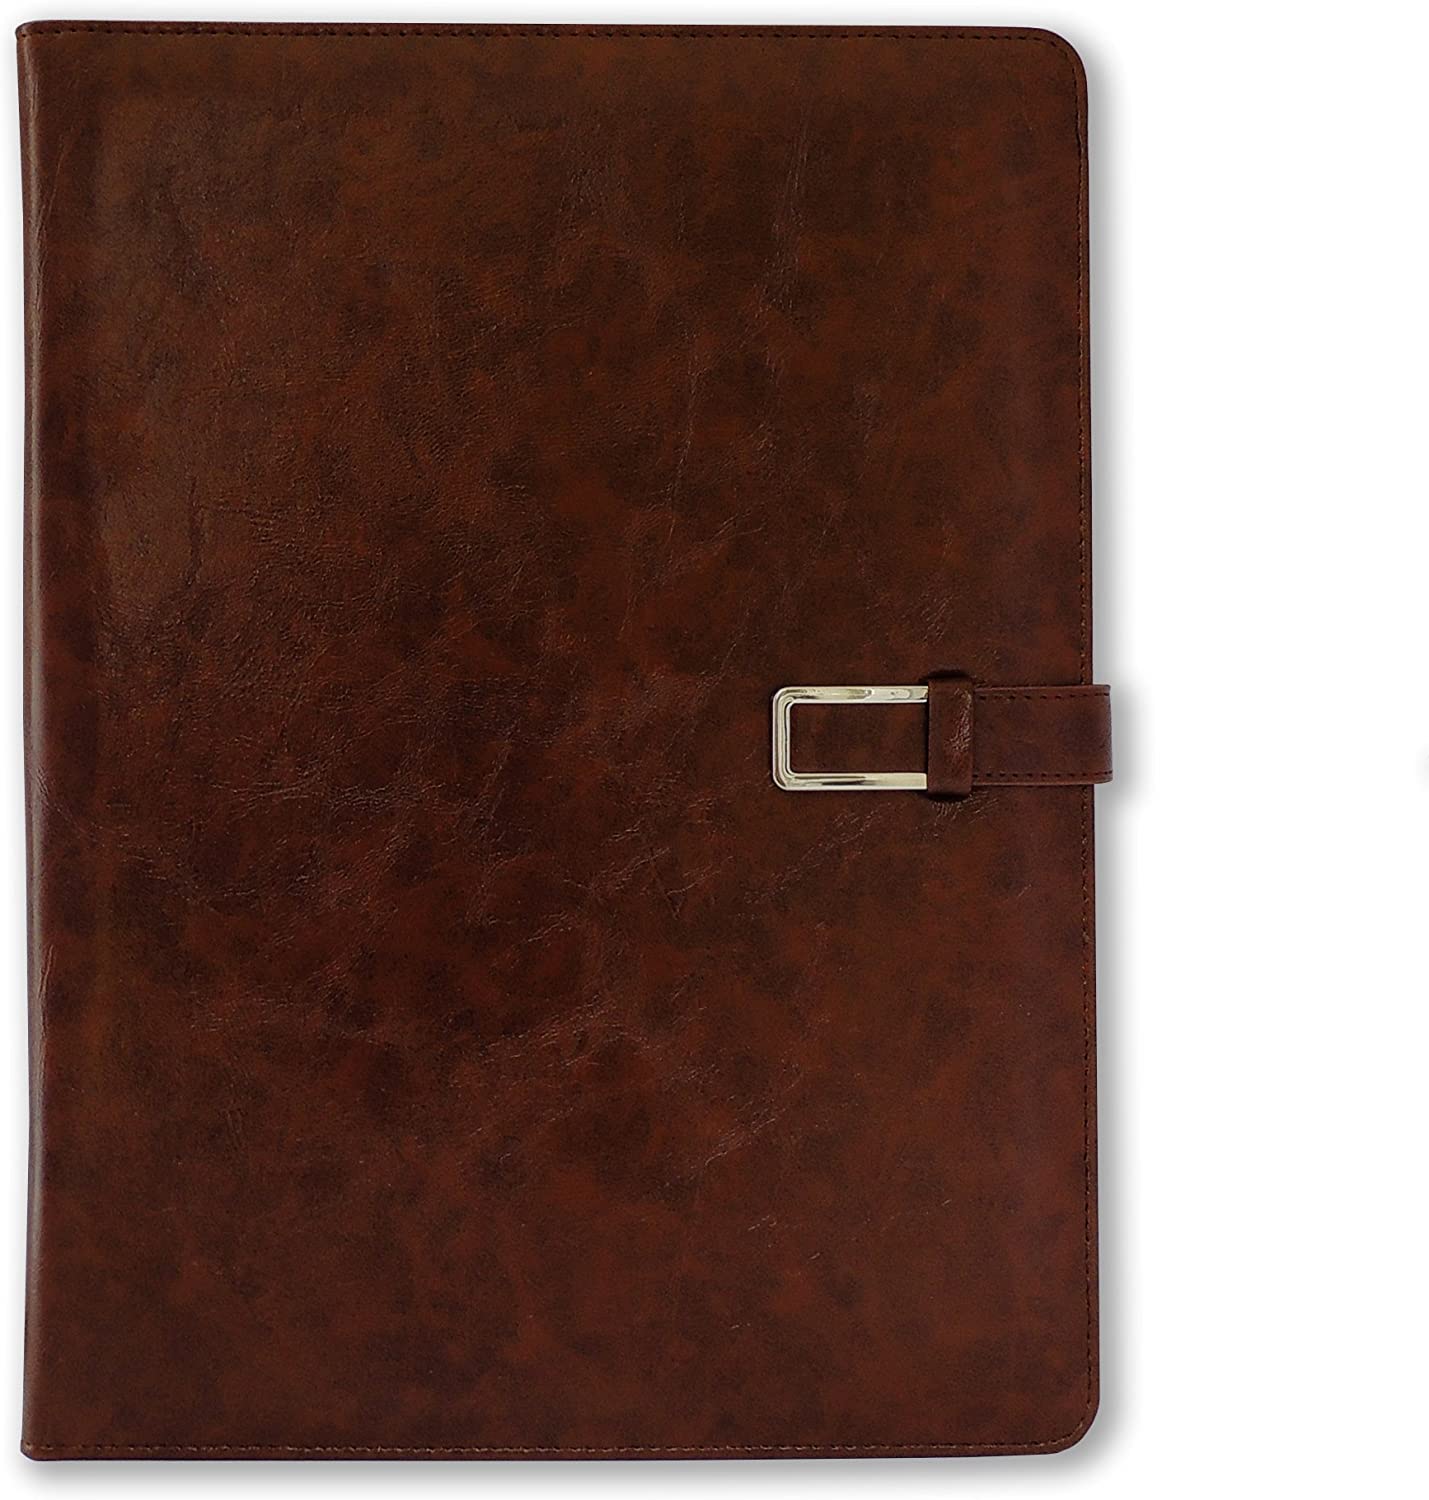 Professional Business Padfolio/Resume Portfolio Folder with Letter Size Writing Pad, Premium Leather Look and Feel